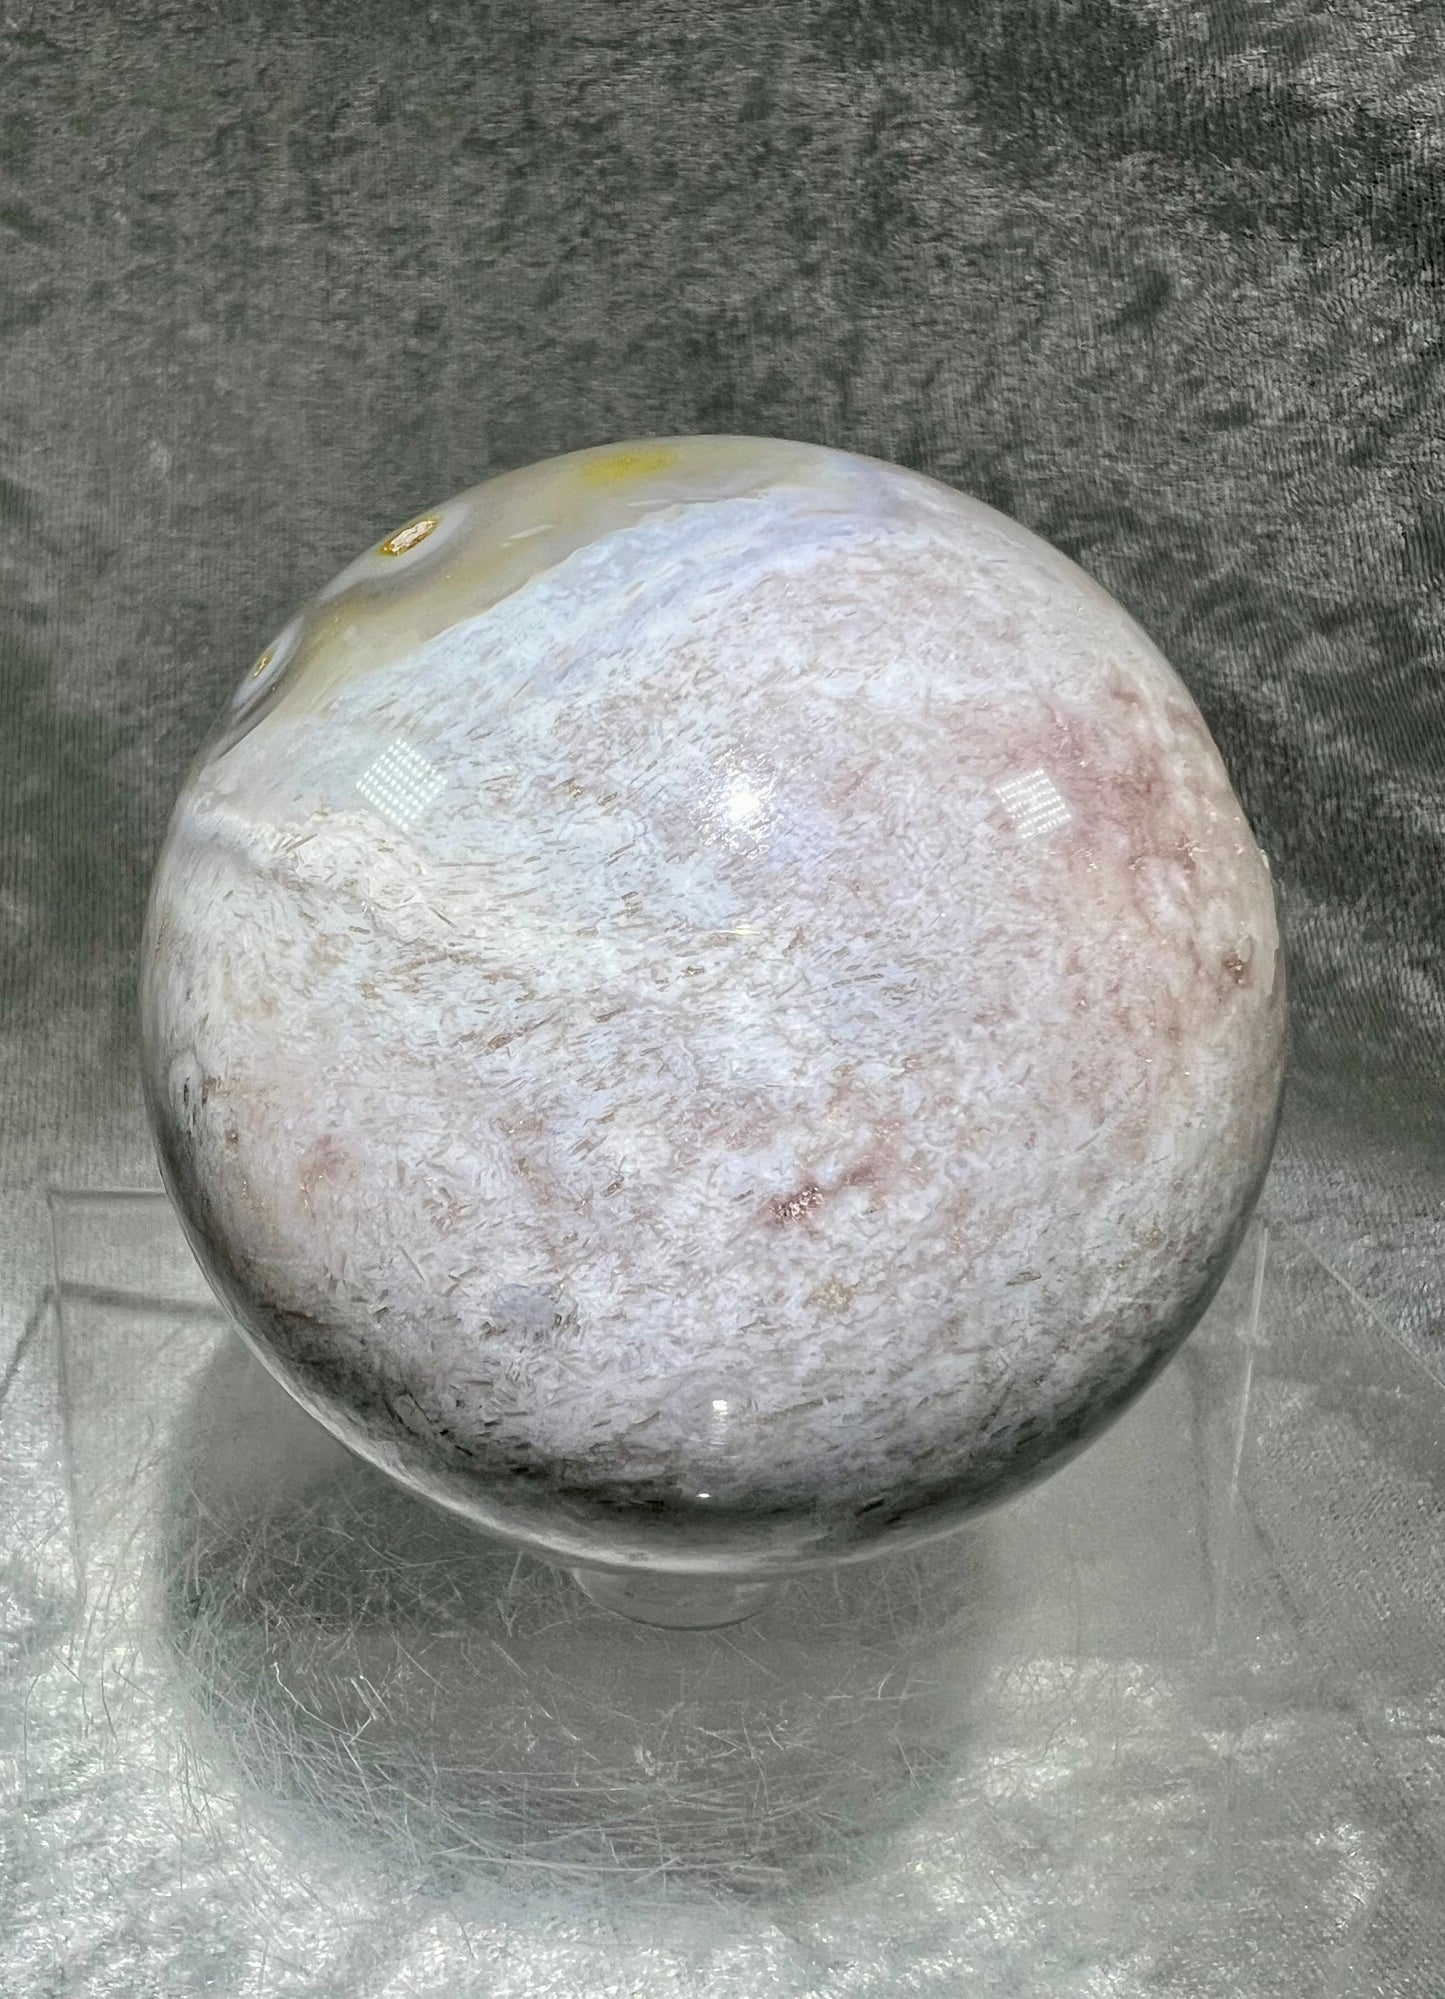 Amazing Sugar Druzy Pink Amethyst Sphere. 76mm. Stunning Shades Of Pink And Purple. High Quality Beautiful Crystal Sphere.